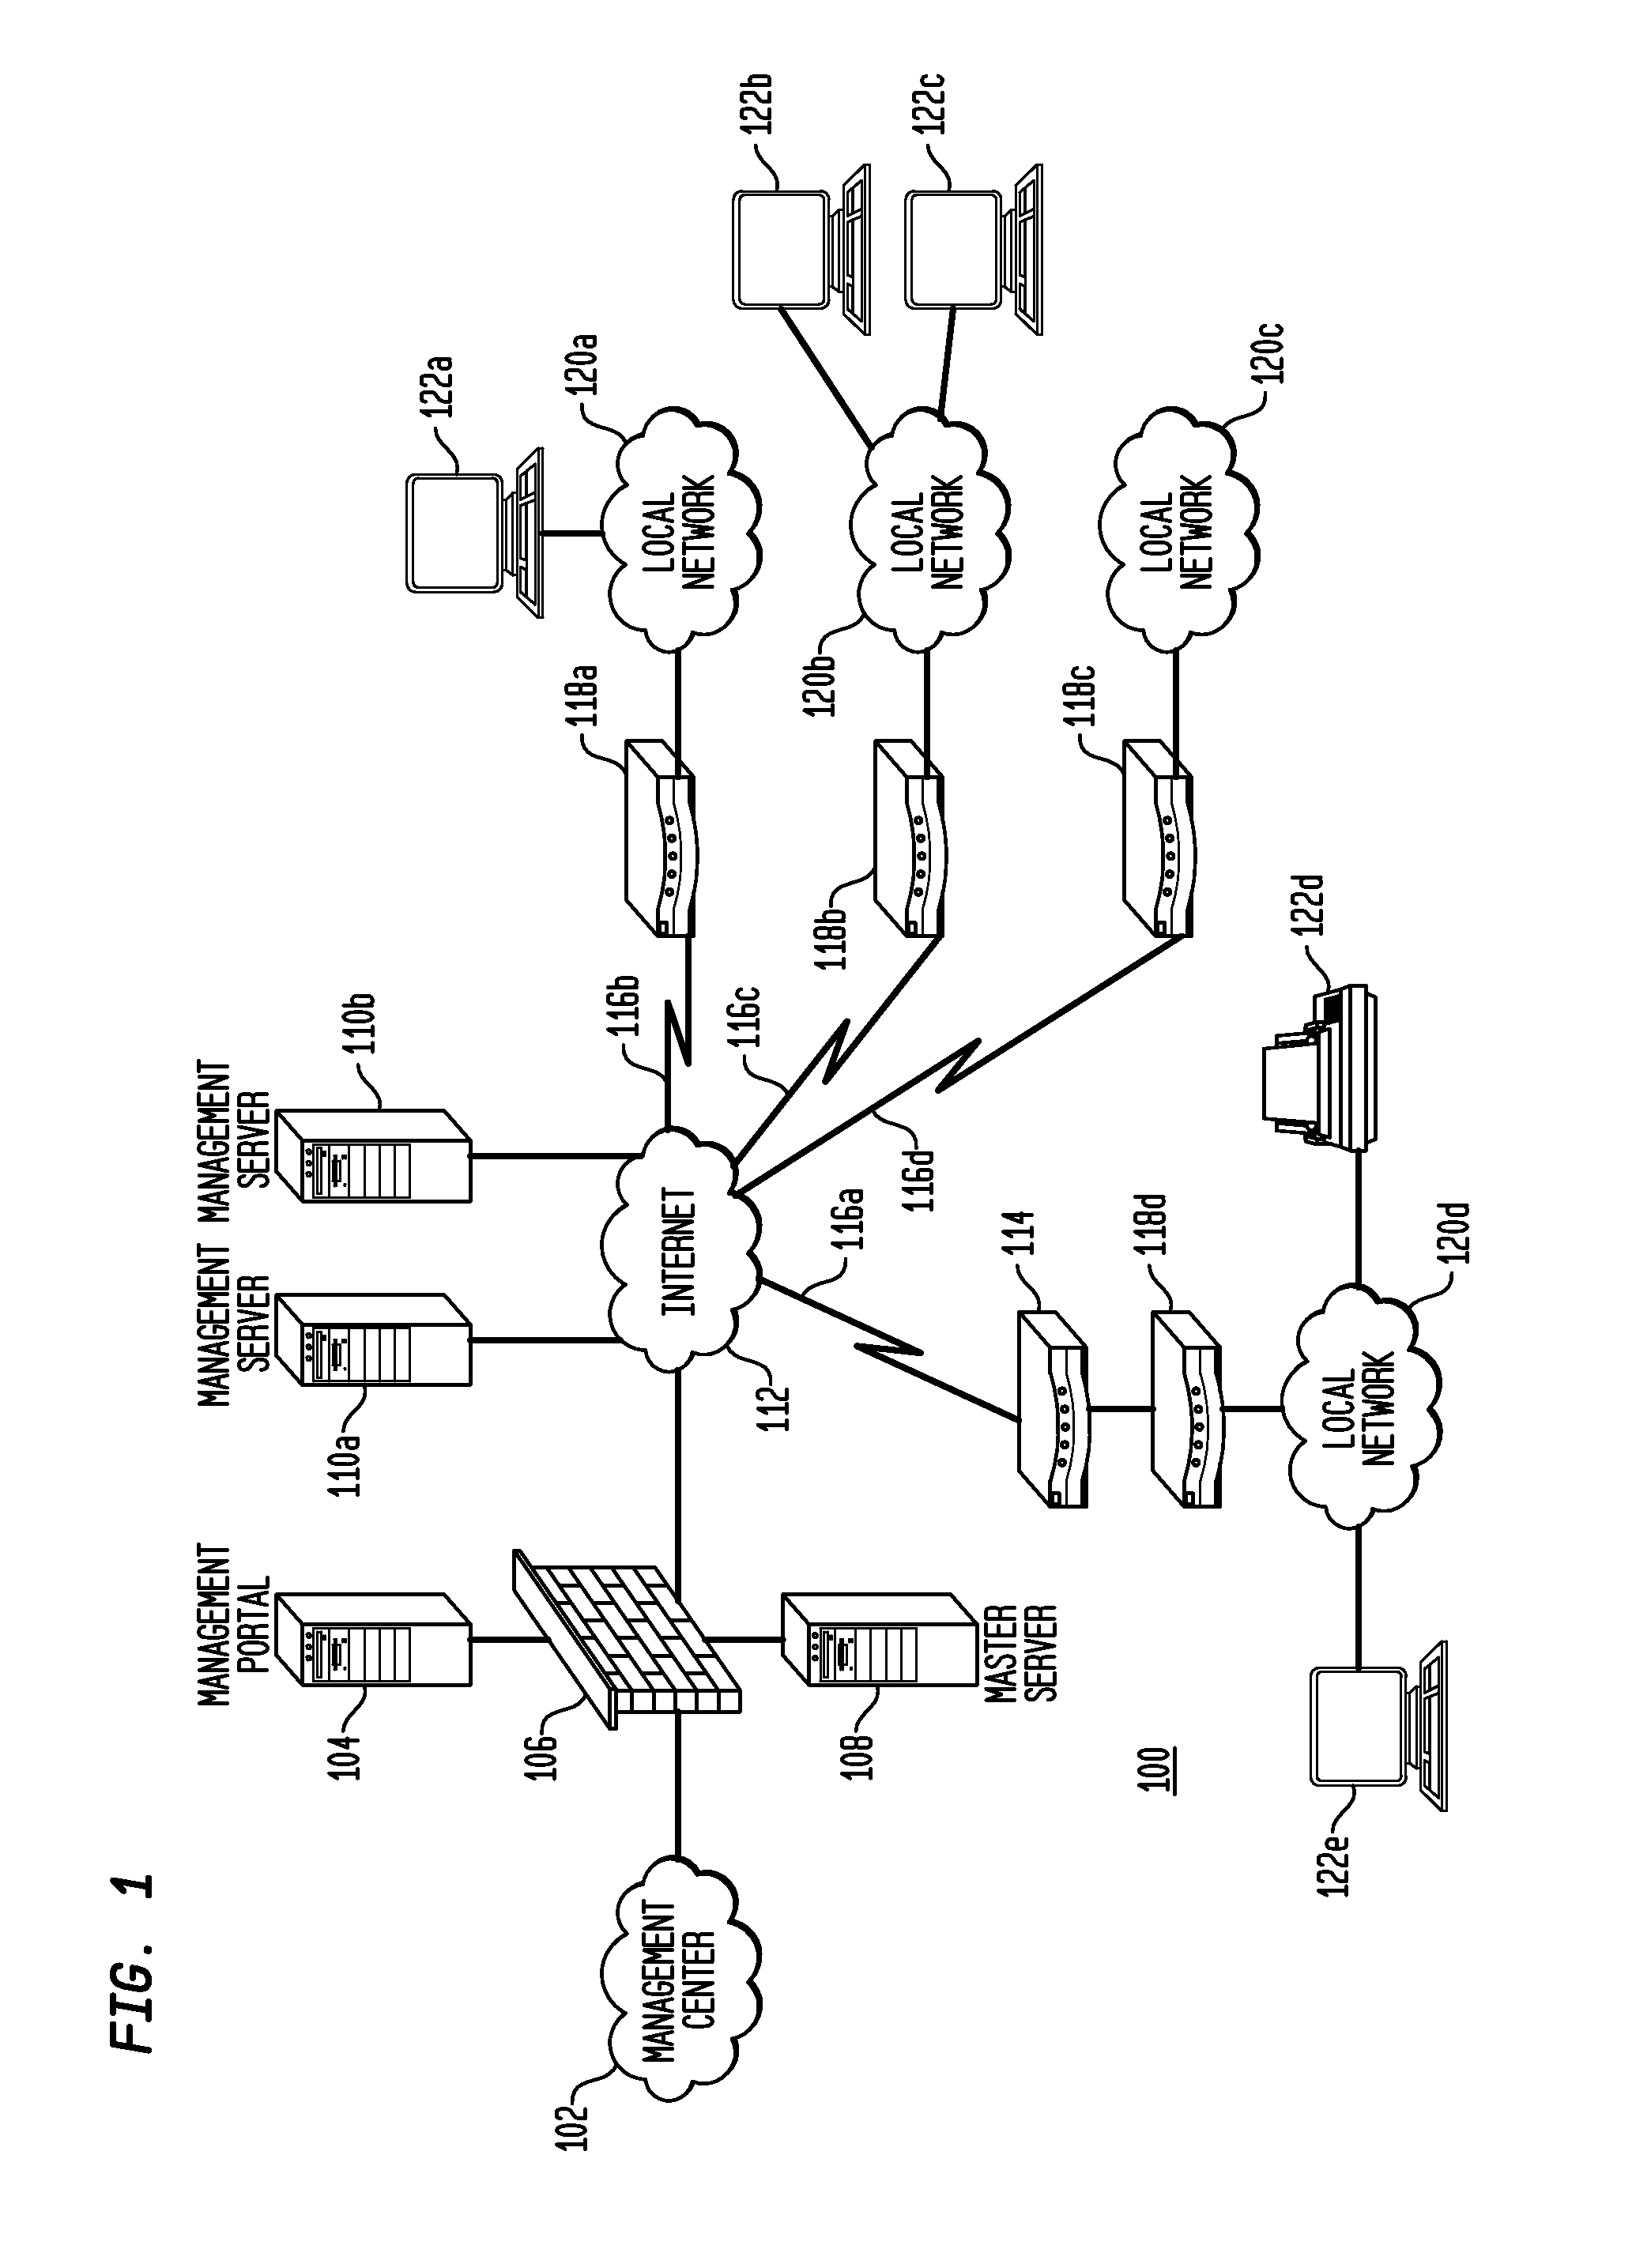 Systems and Methods for Remotely Maintaining Virtual Private Networks